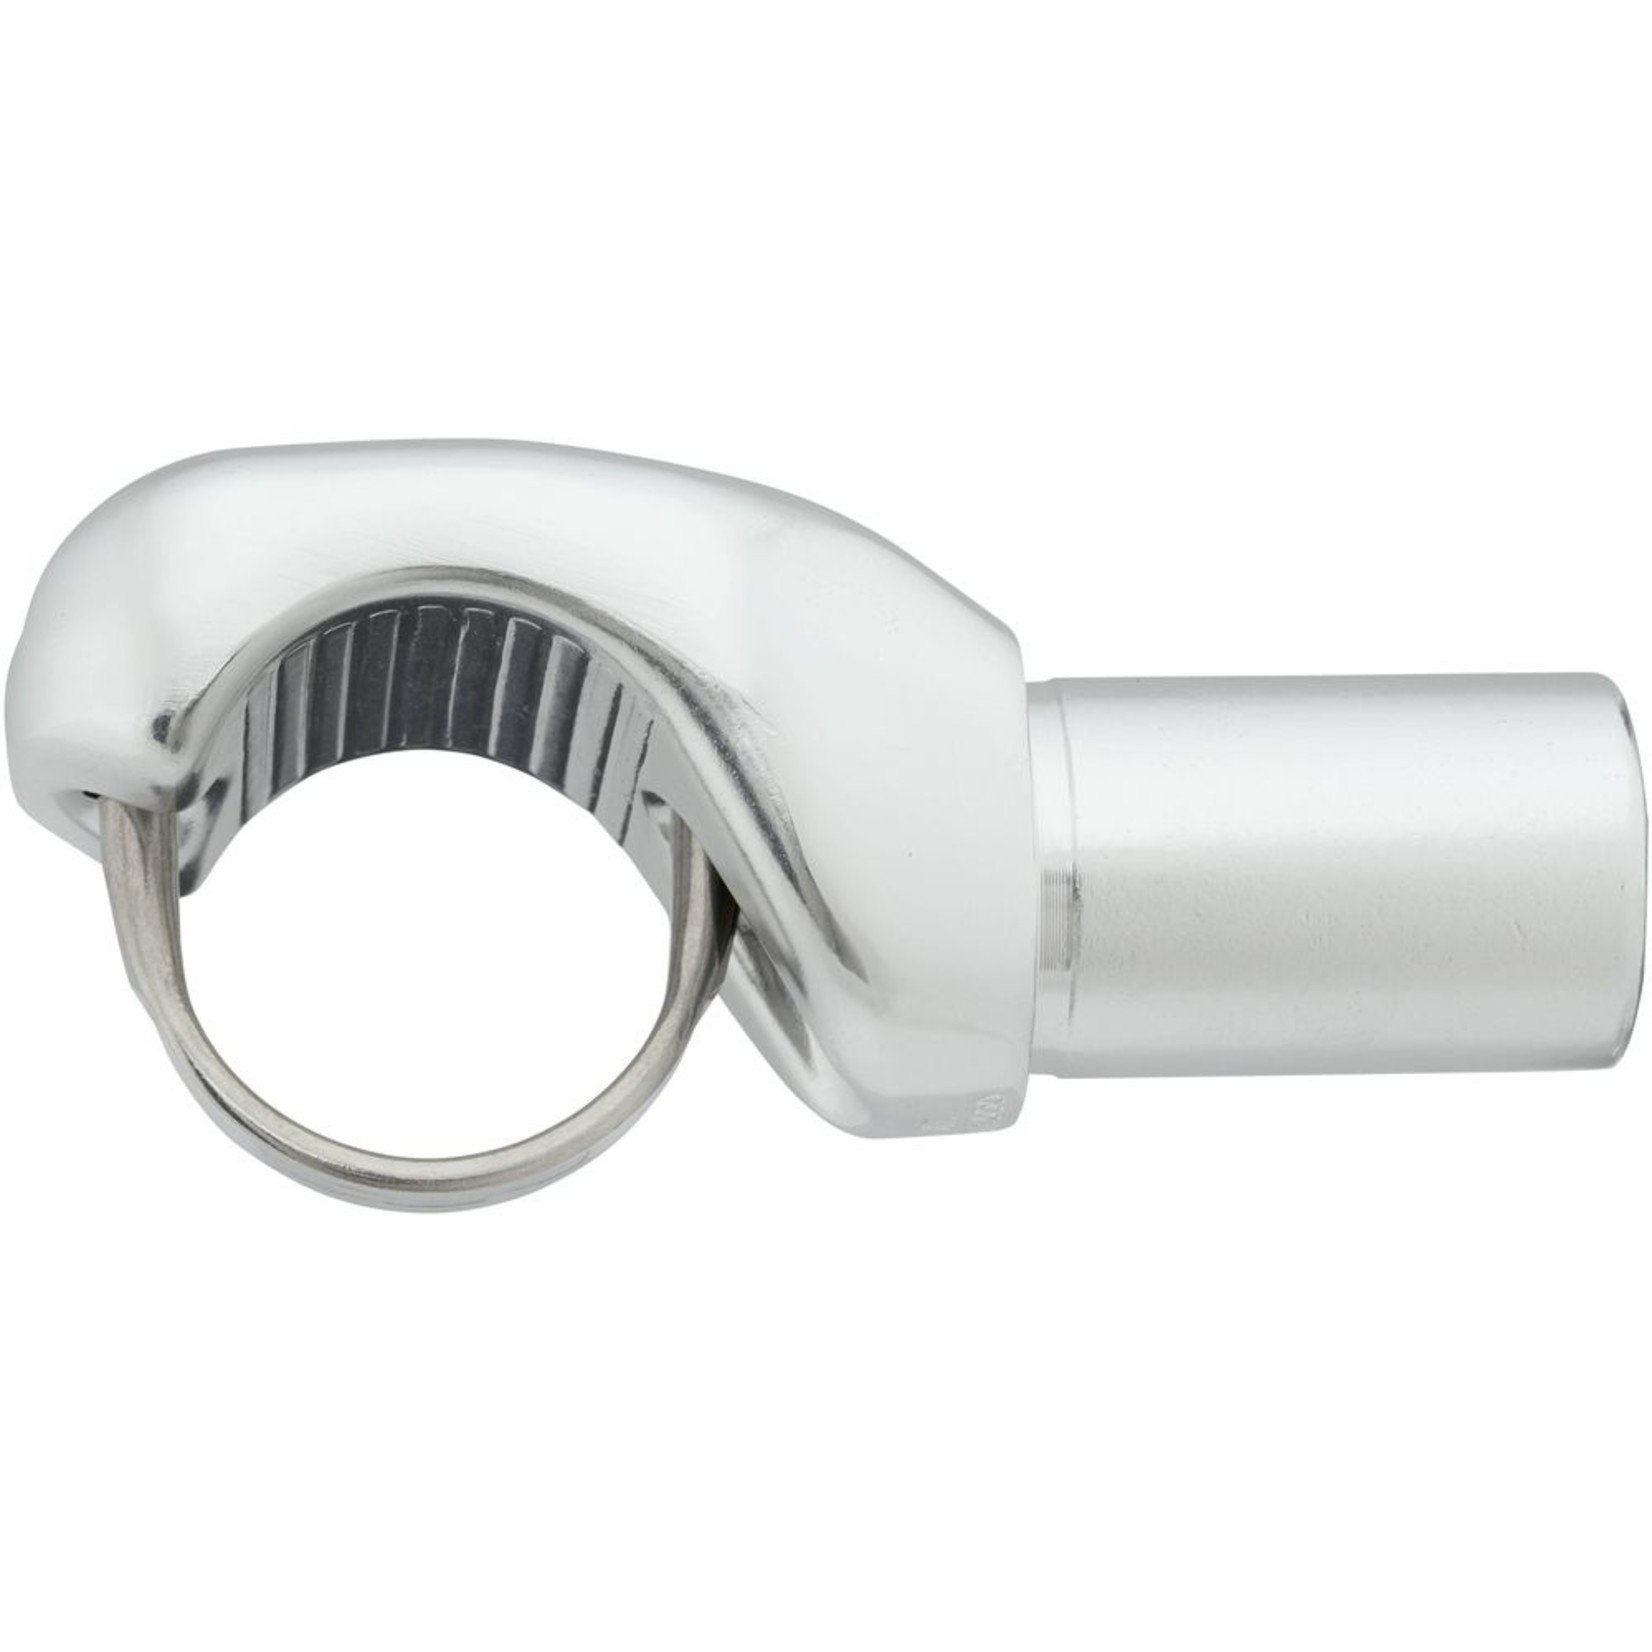 NRS NRS LoPro Frame Fittings